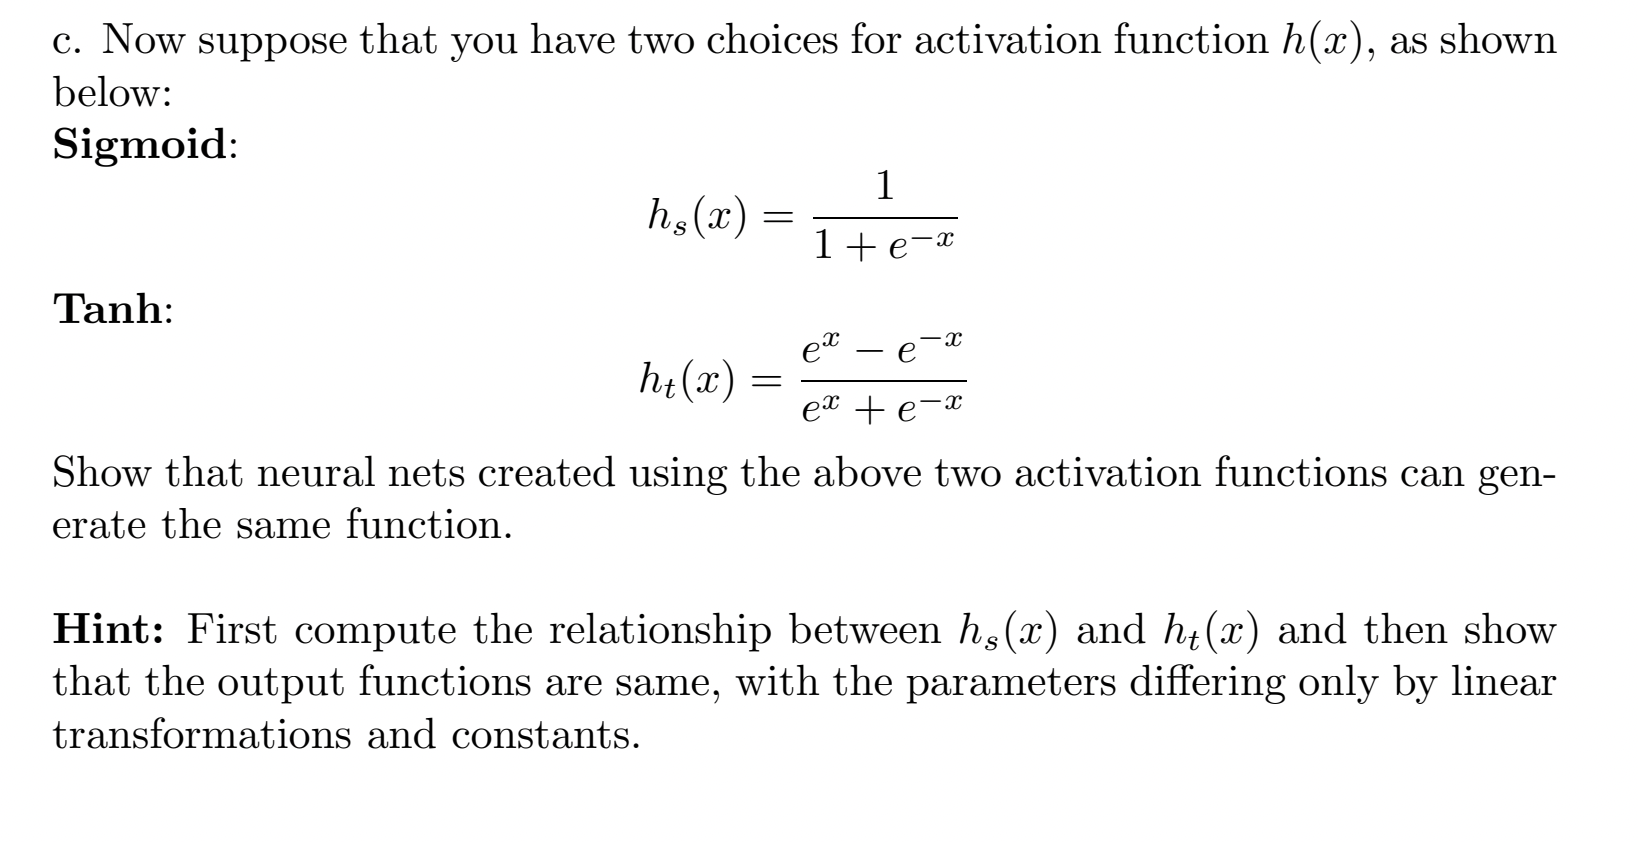 c. Now suppose that you have two choices for activation function h(x), as shown below: Sigmoid: Tanh: hs(x) =